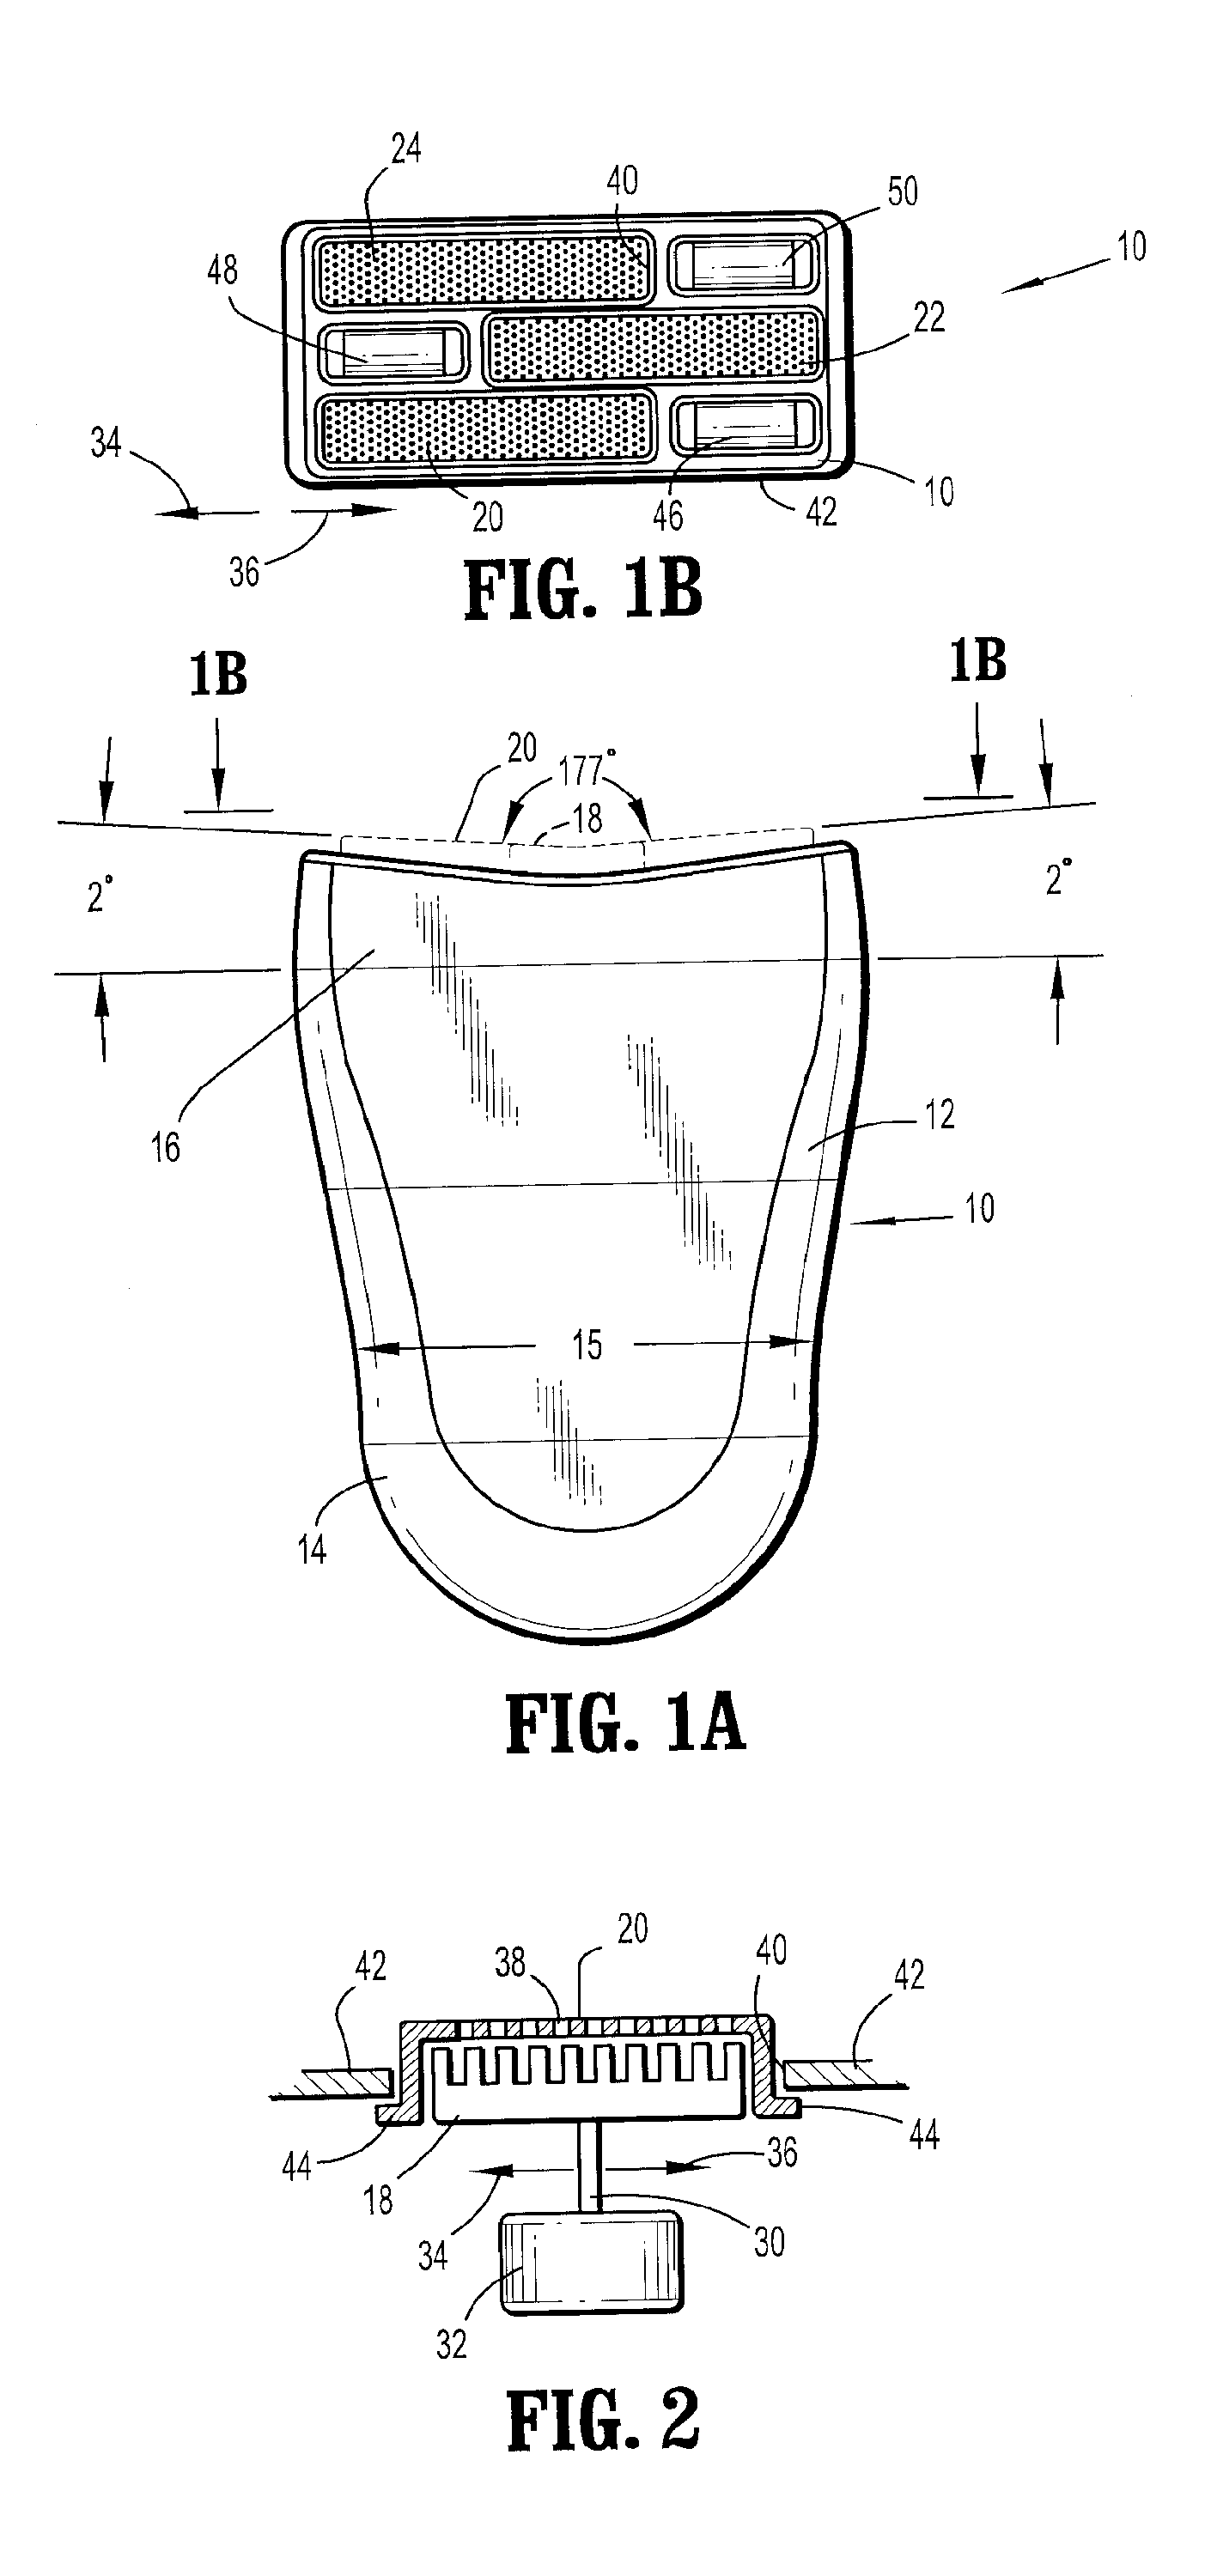 Form fitting electric shaver with multiple cutting assemblies